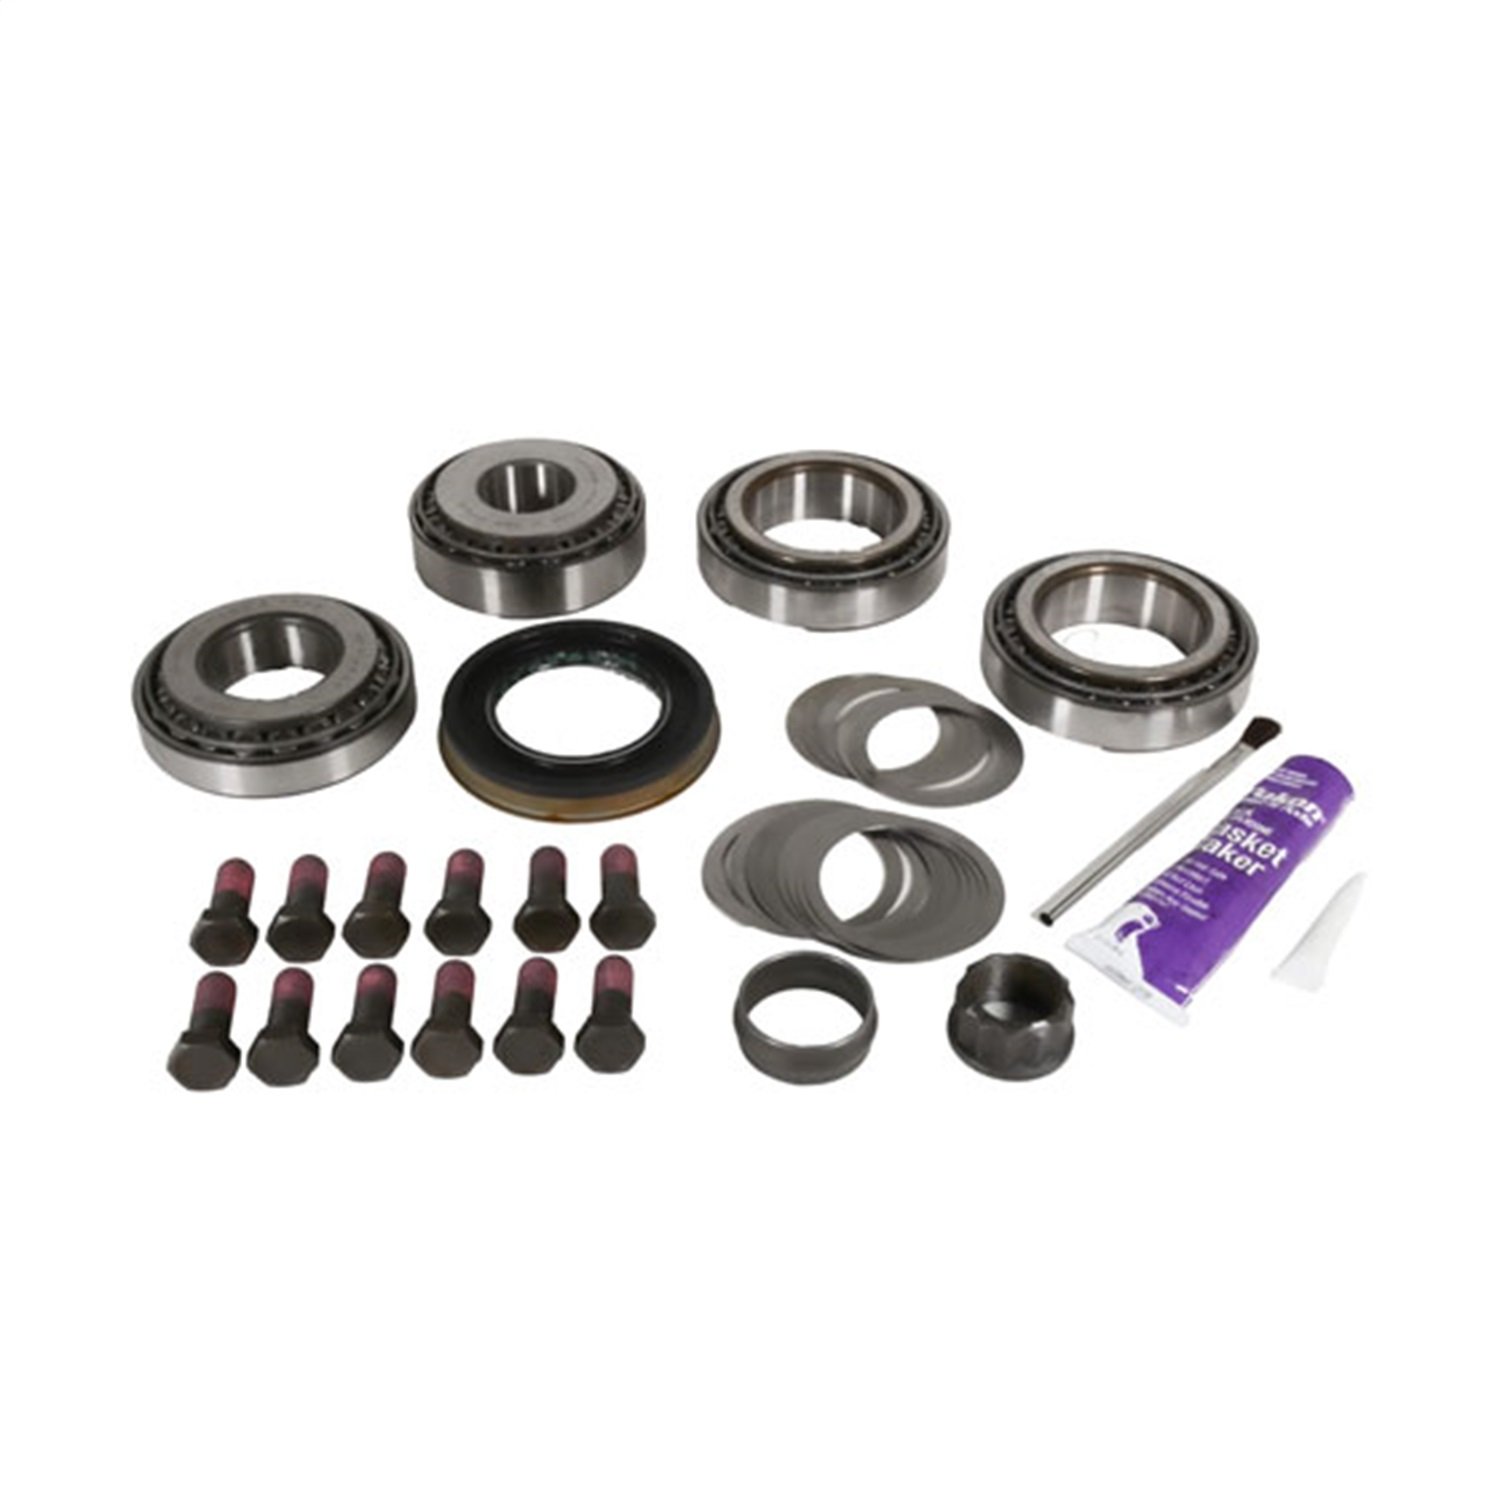 USA Standard 12380 Gear Axle Differential Bearing And Seal Kit, For Chrysler/Aam 11.5 in.